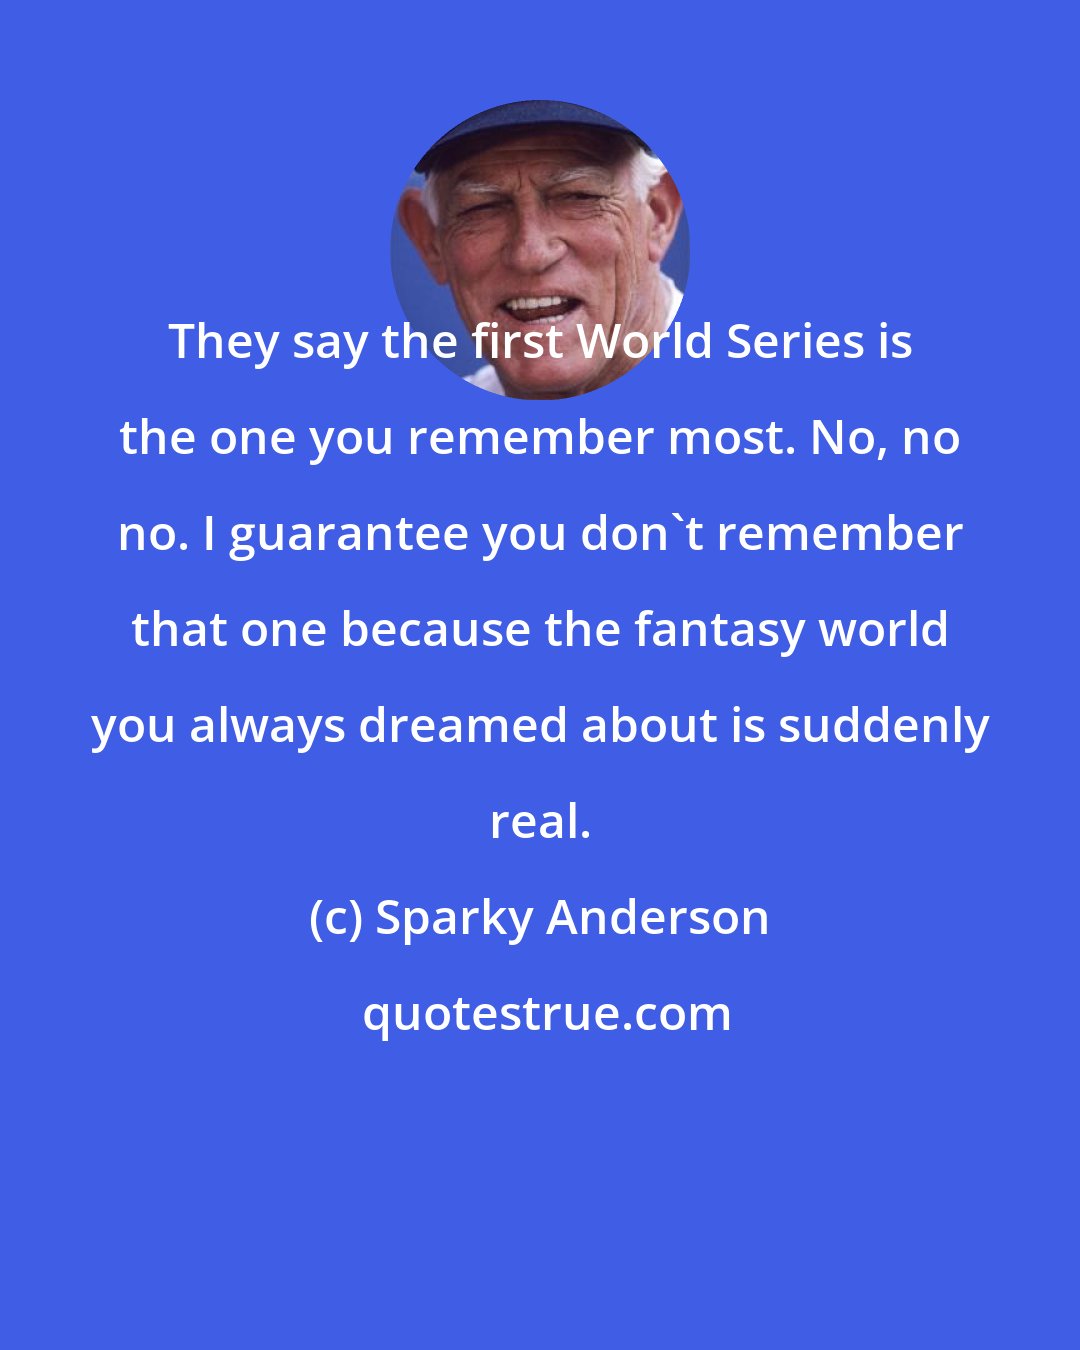 Sparky Anderson: They say the first World Series is the one you remember most. No, no no. I guarantee you don't remember that one because the fantasy world you always dreamed about is suddenly real.